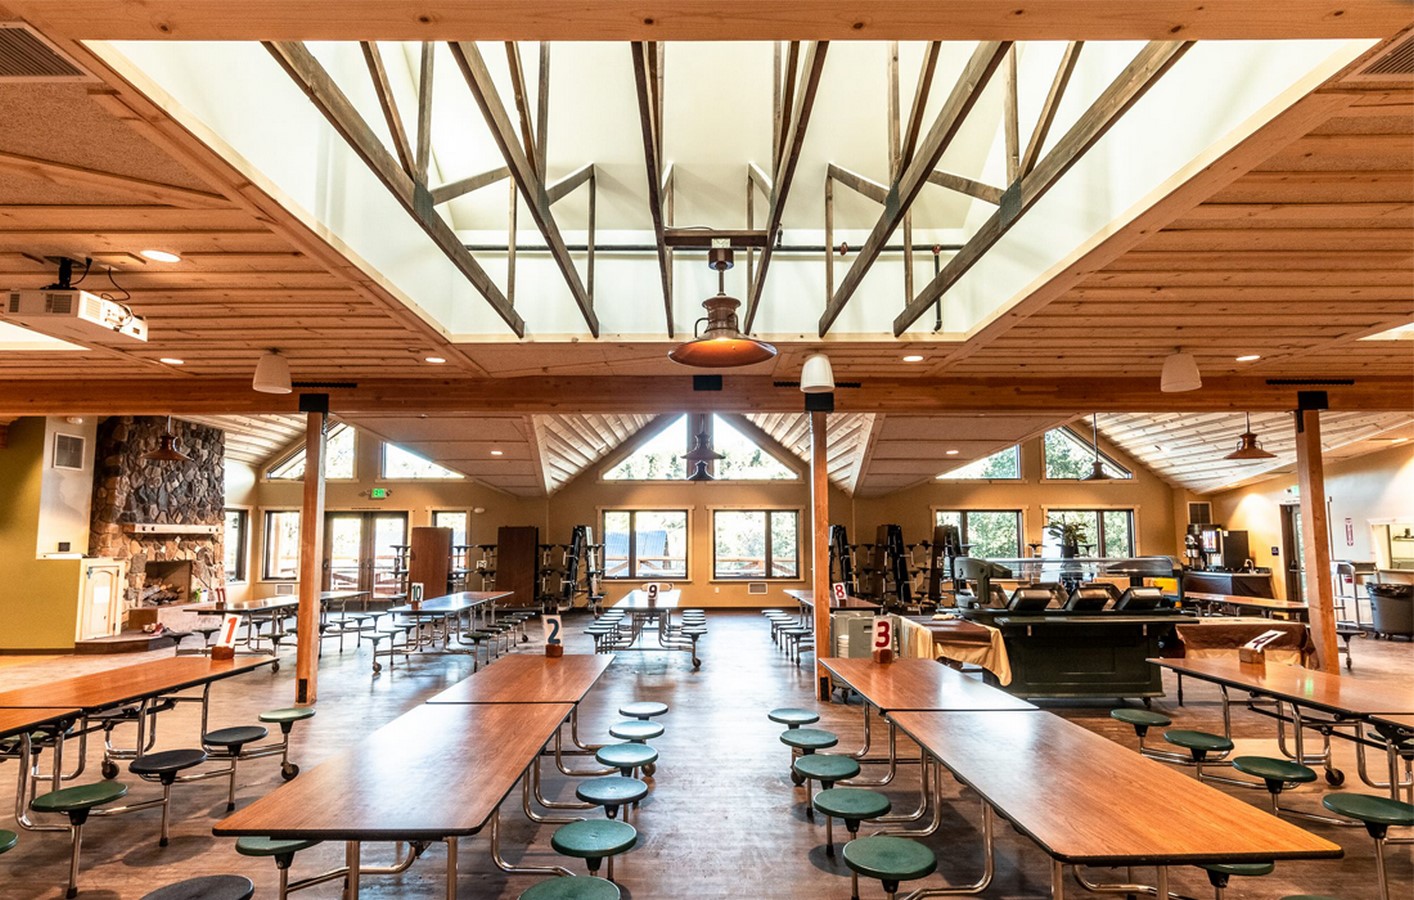 YMCA Camp Marston Dining Hall Addition By Hubbell and Hubbell Architects - Sheet3